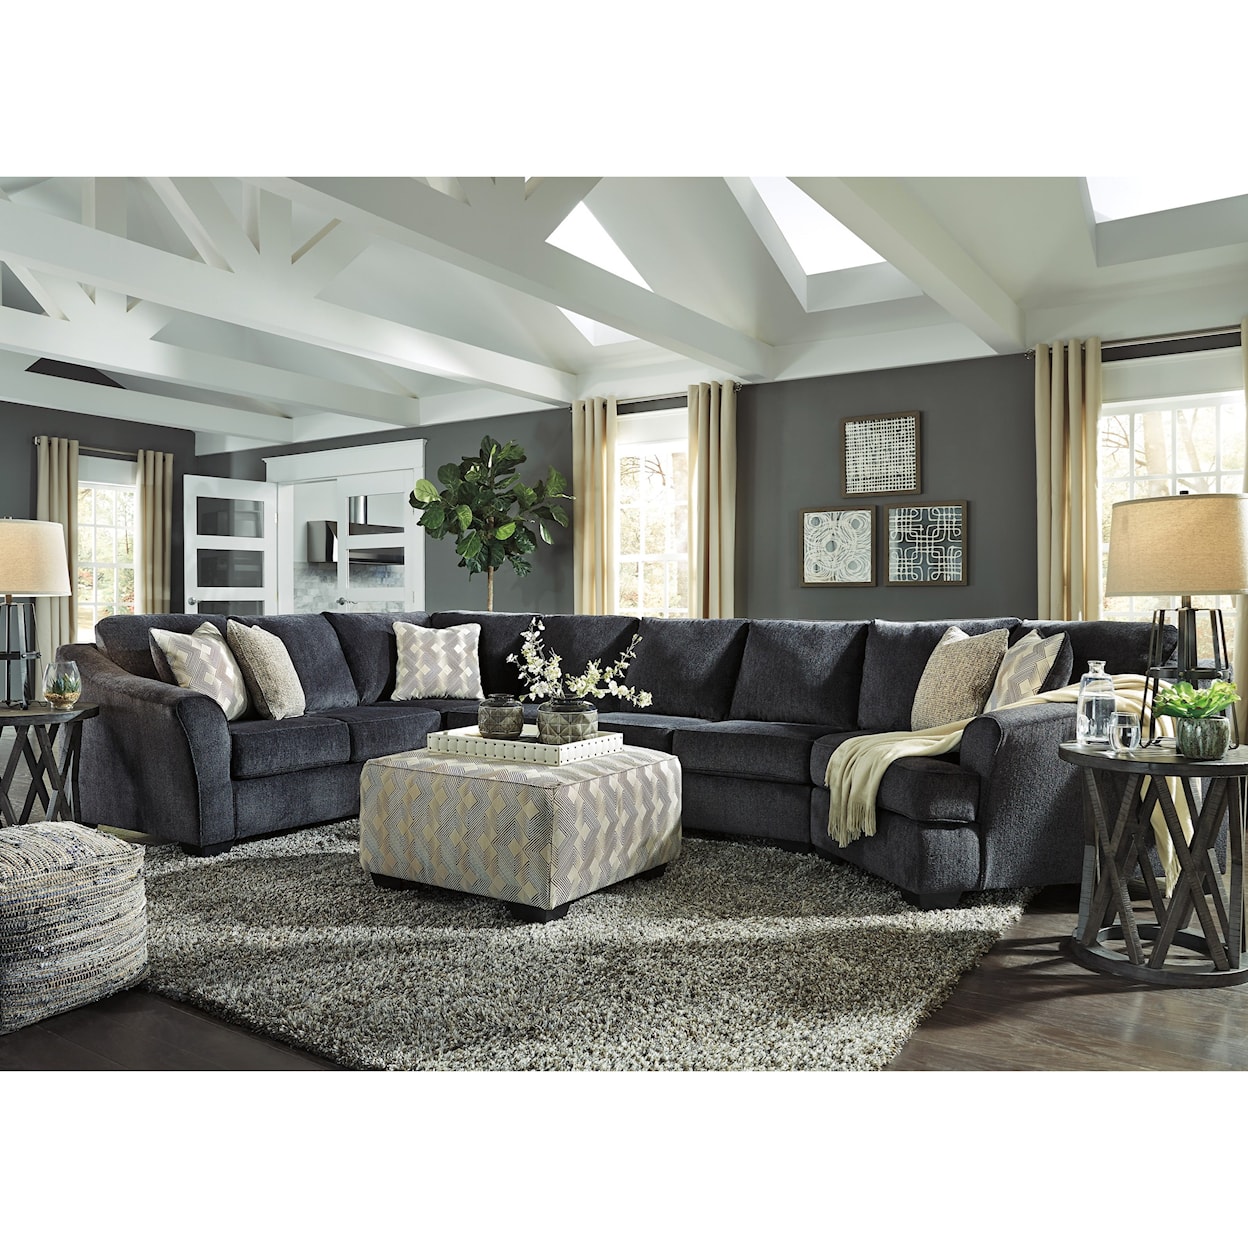 Signature Eltmann 4-Piece Sectional with Right Cuddler